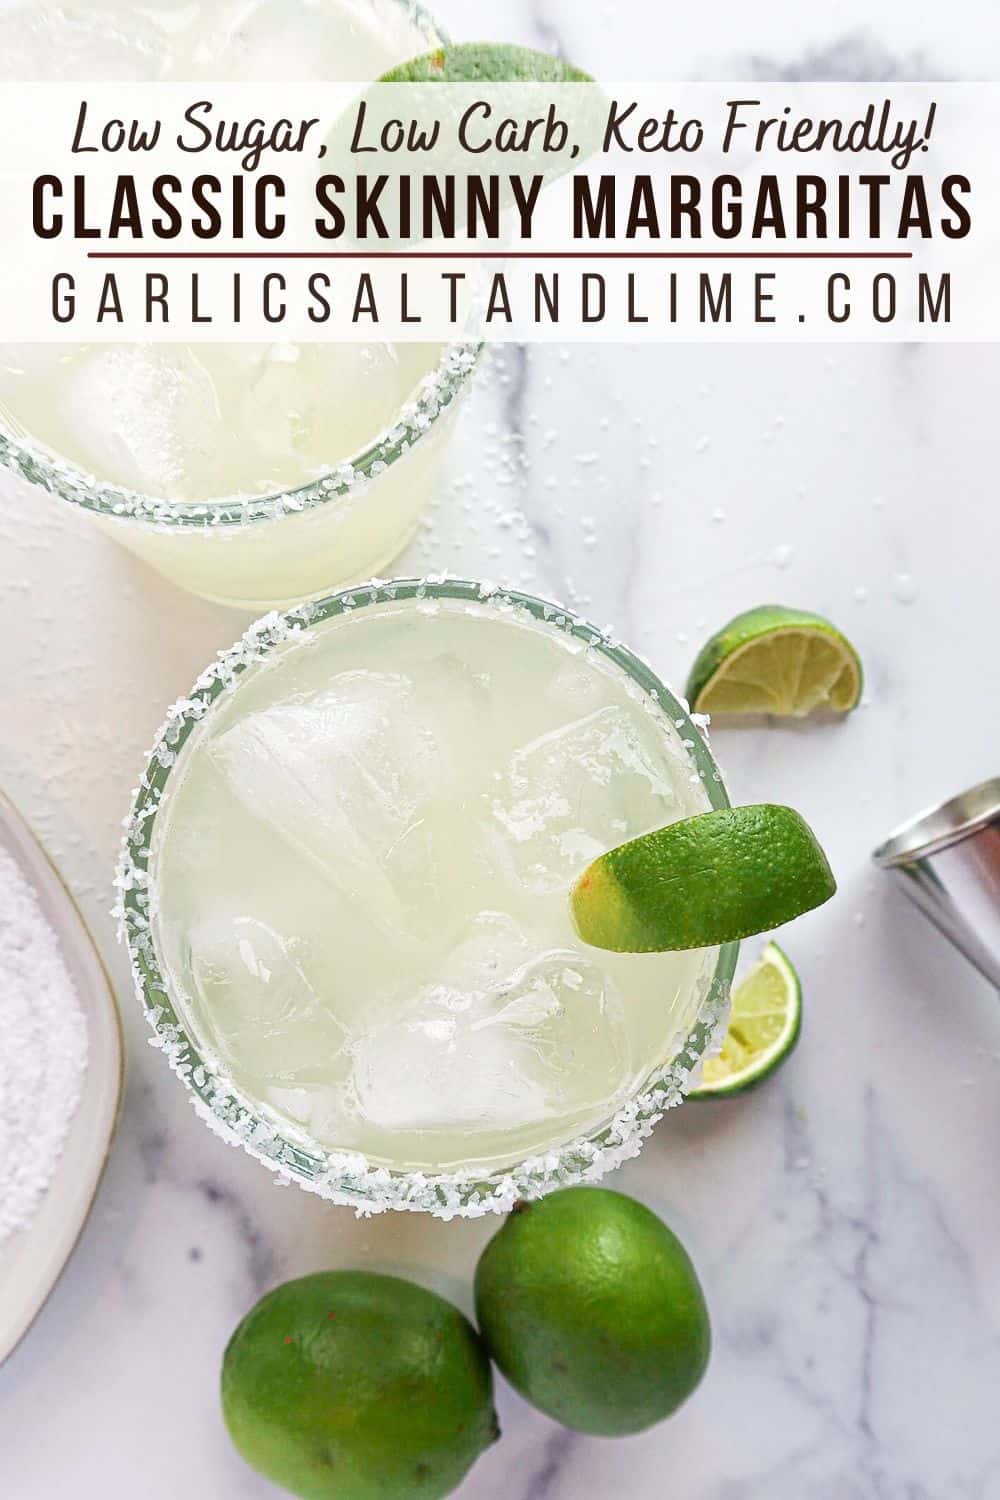 Skinny margaritas with lime wedges and text overlay for Pinterest.